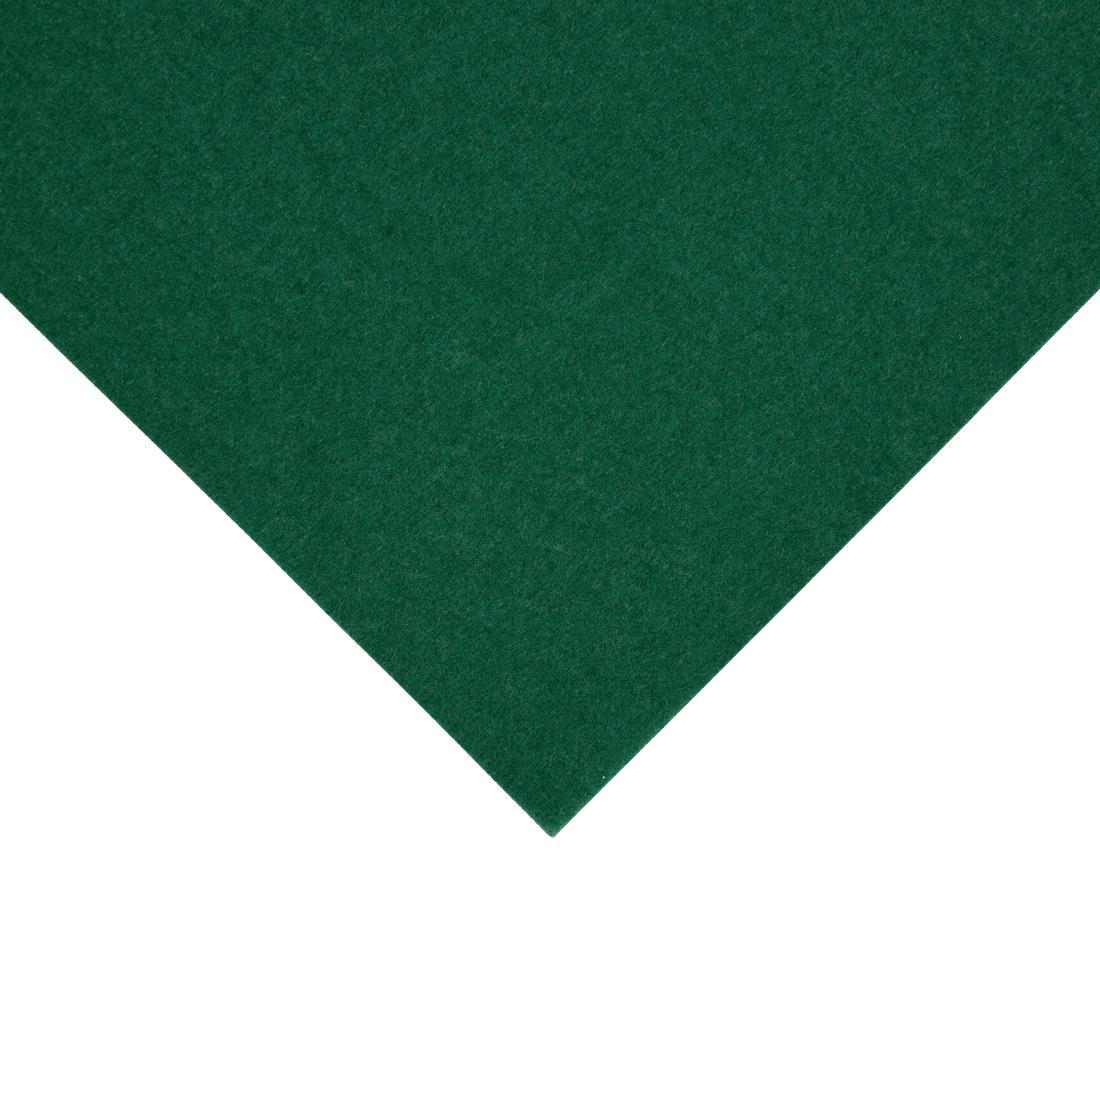 Fiesta Recyclable Lunch Napkin Green 33x33cm 2ply 1/4 Fold (Pack of 2000) - FE223  - 2